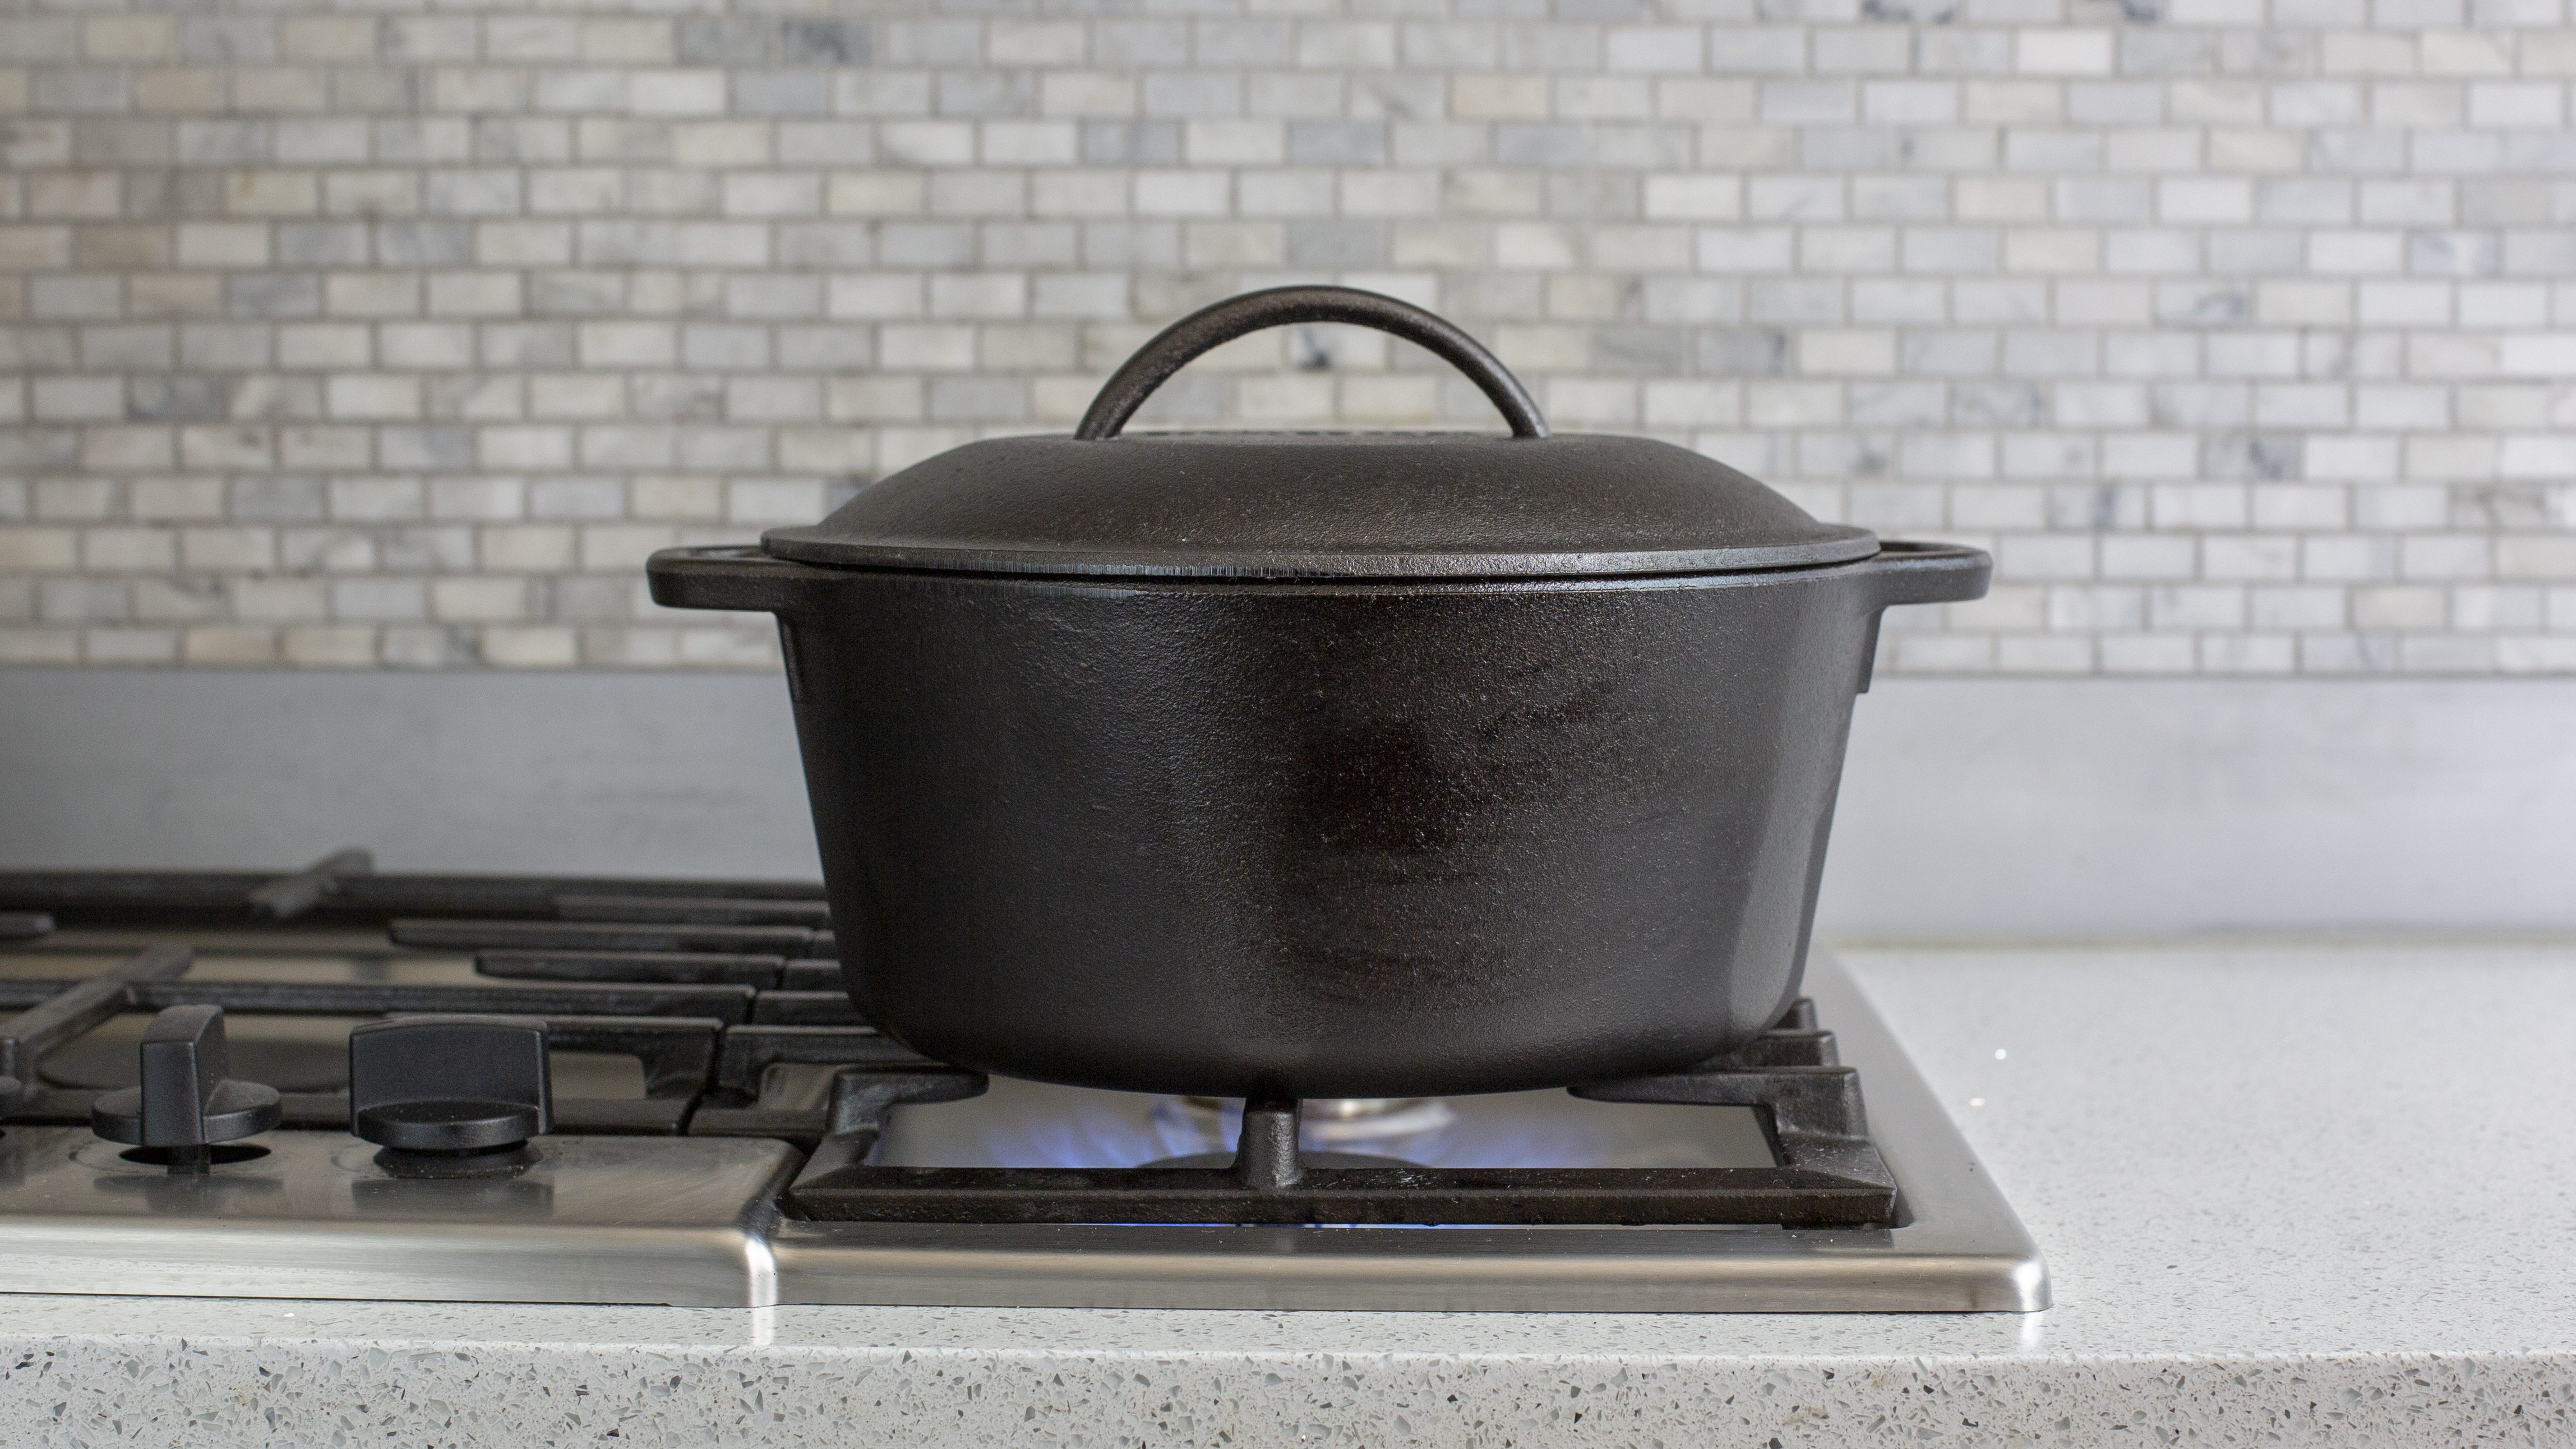 Lodge Pre-Seasoned 5 Quart Cast Iron Dutch Oven with Loop Handles and Cast Iron Cover - image 4 of 5